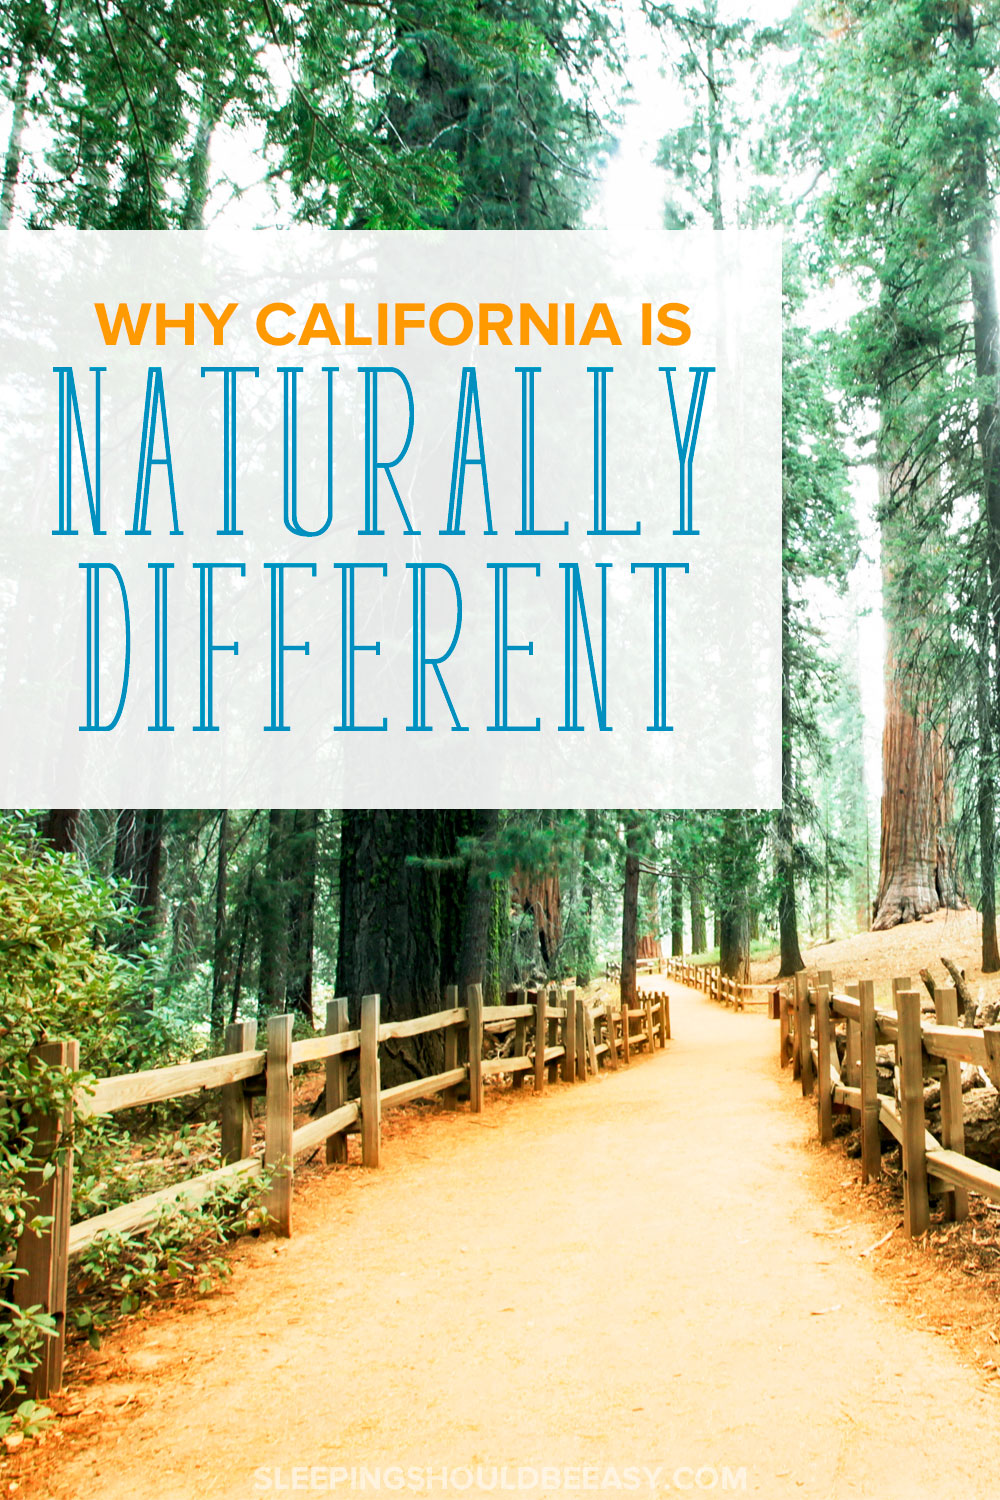 Naturally Different: What Makes California Unique